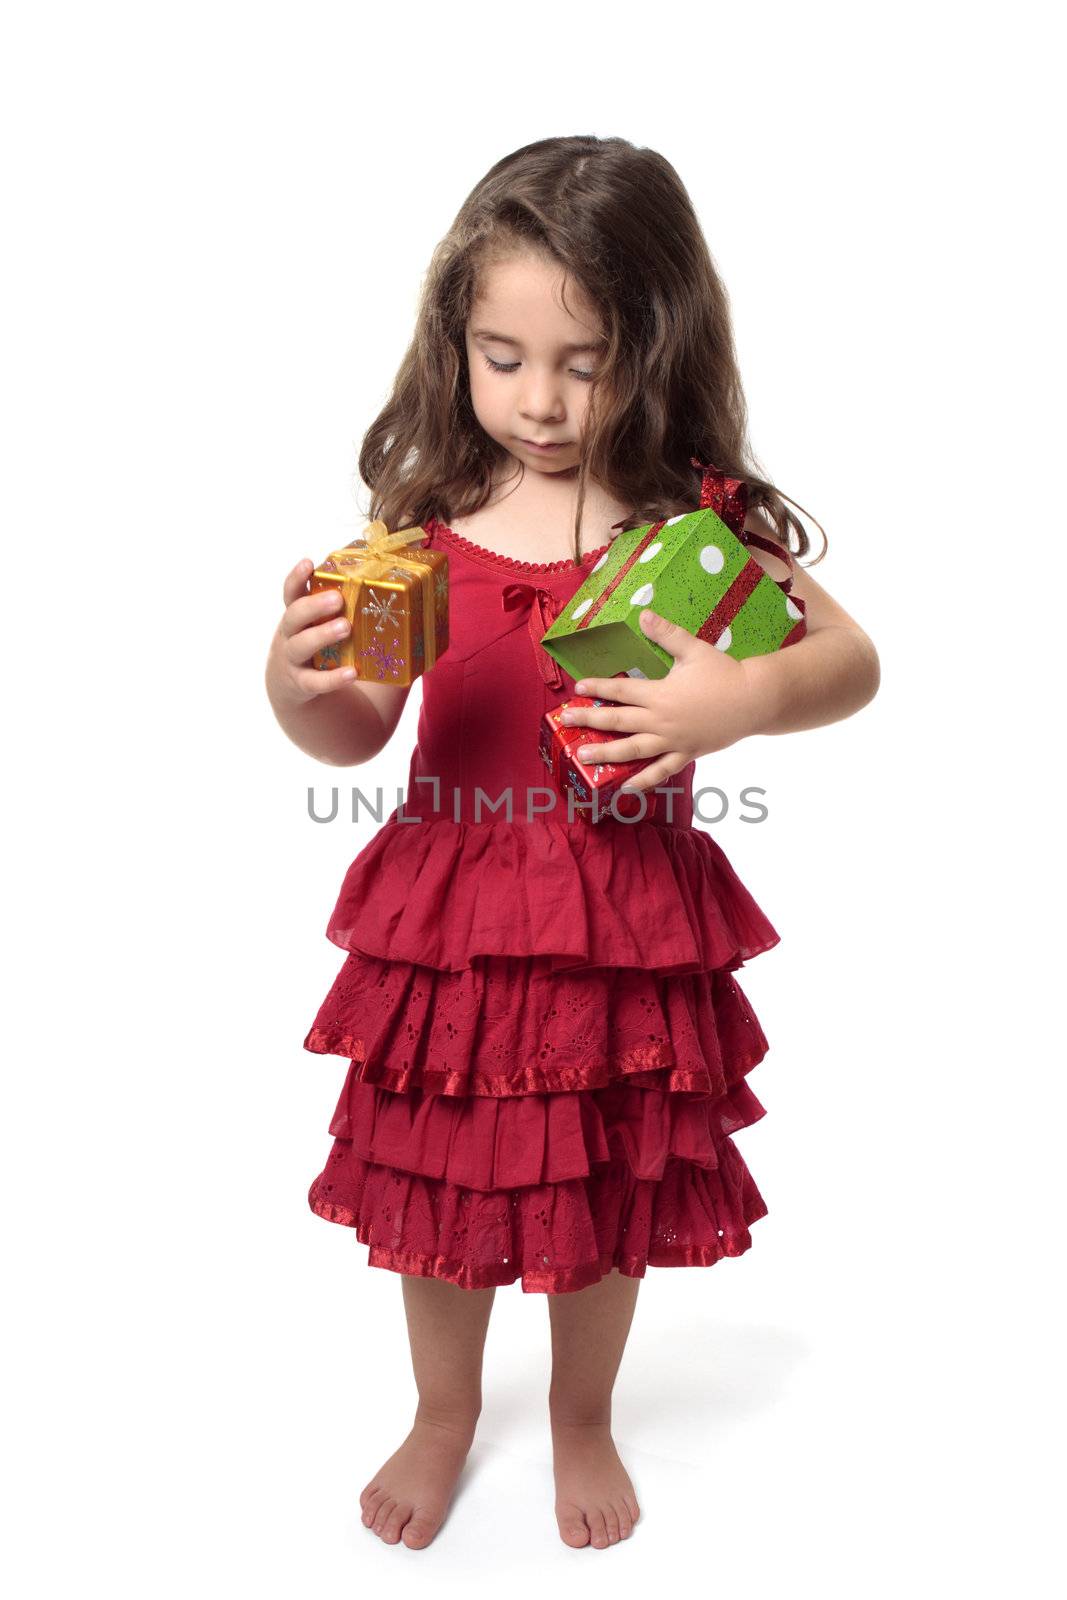 Young girl in pretty red dress holding an armful of red, green and gold gifts.